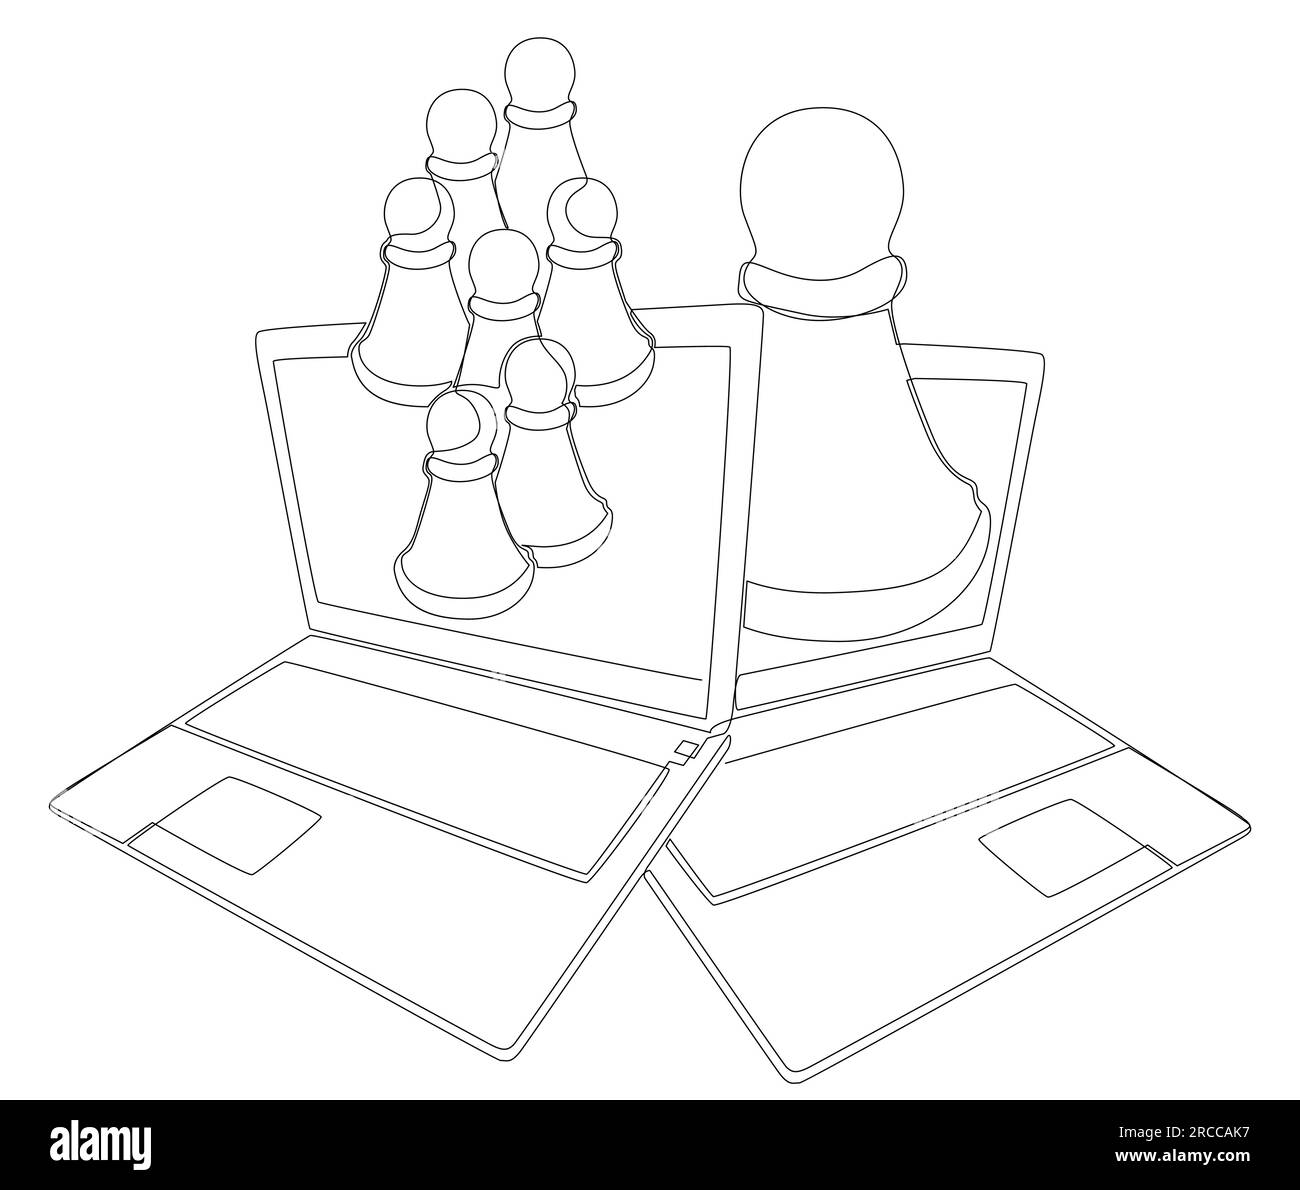 Premium Vector  Line art sketch of all chess pieces aligned.